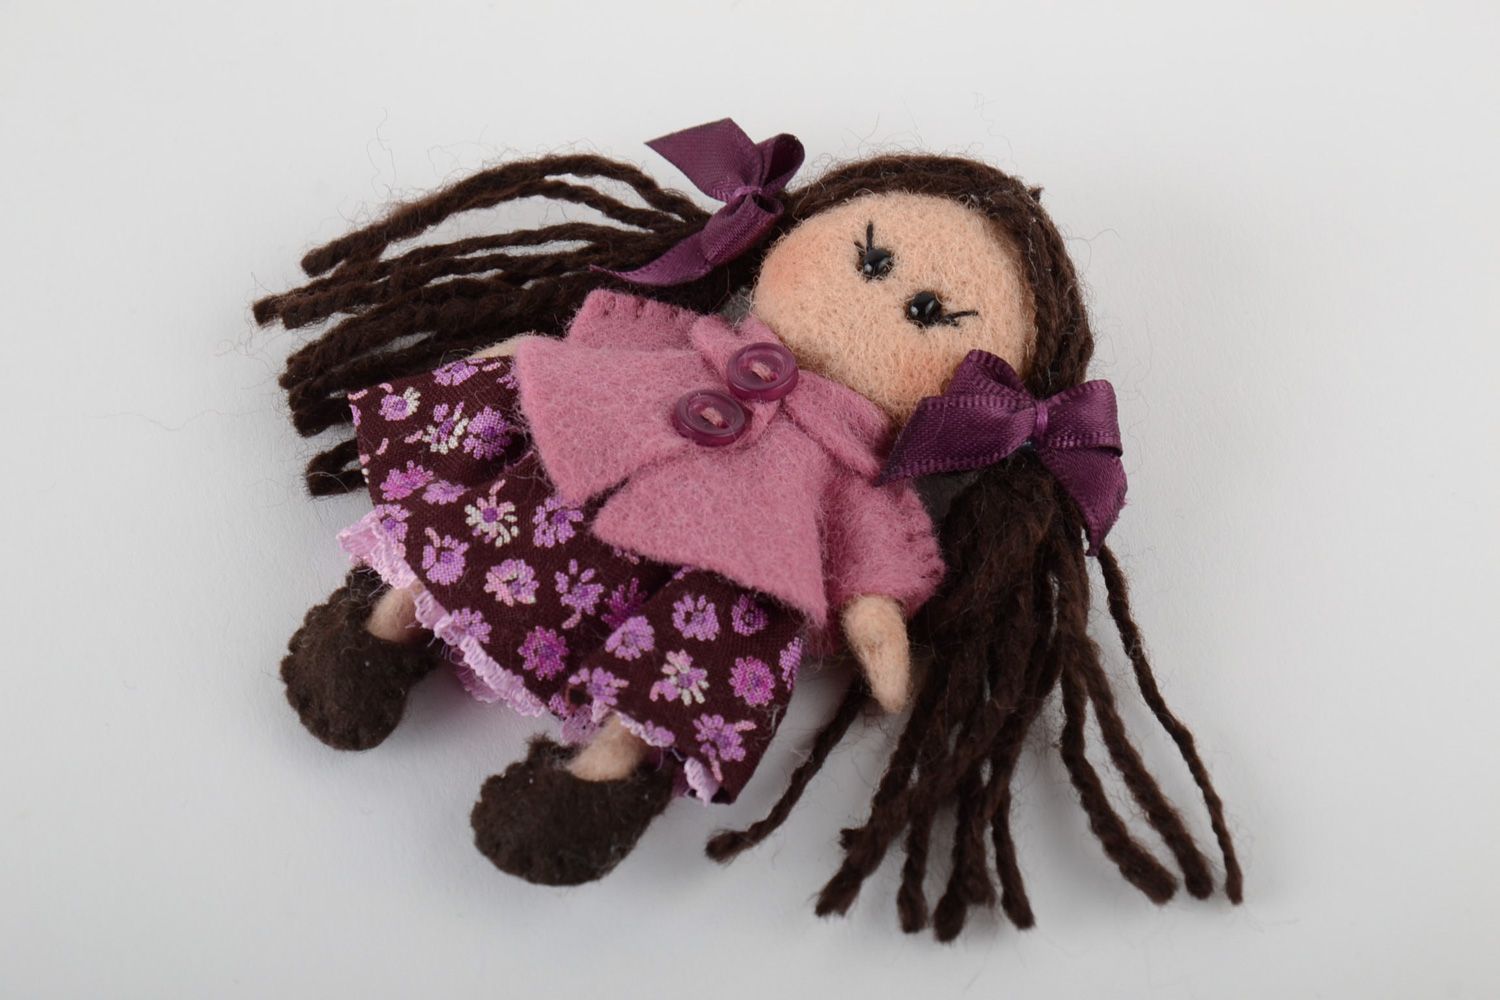 Handmade decorative fridge magnet made of wool and felt in the shape of doll photo 2